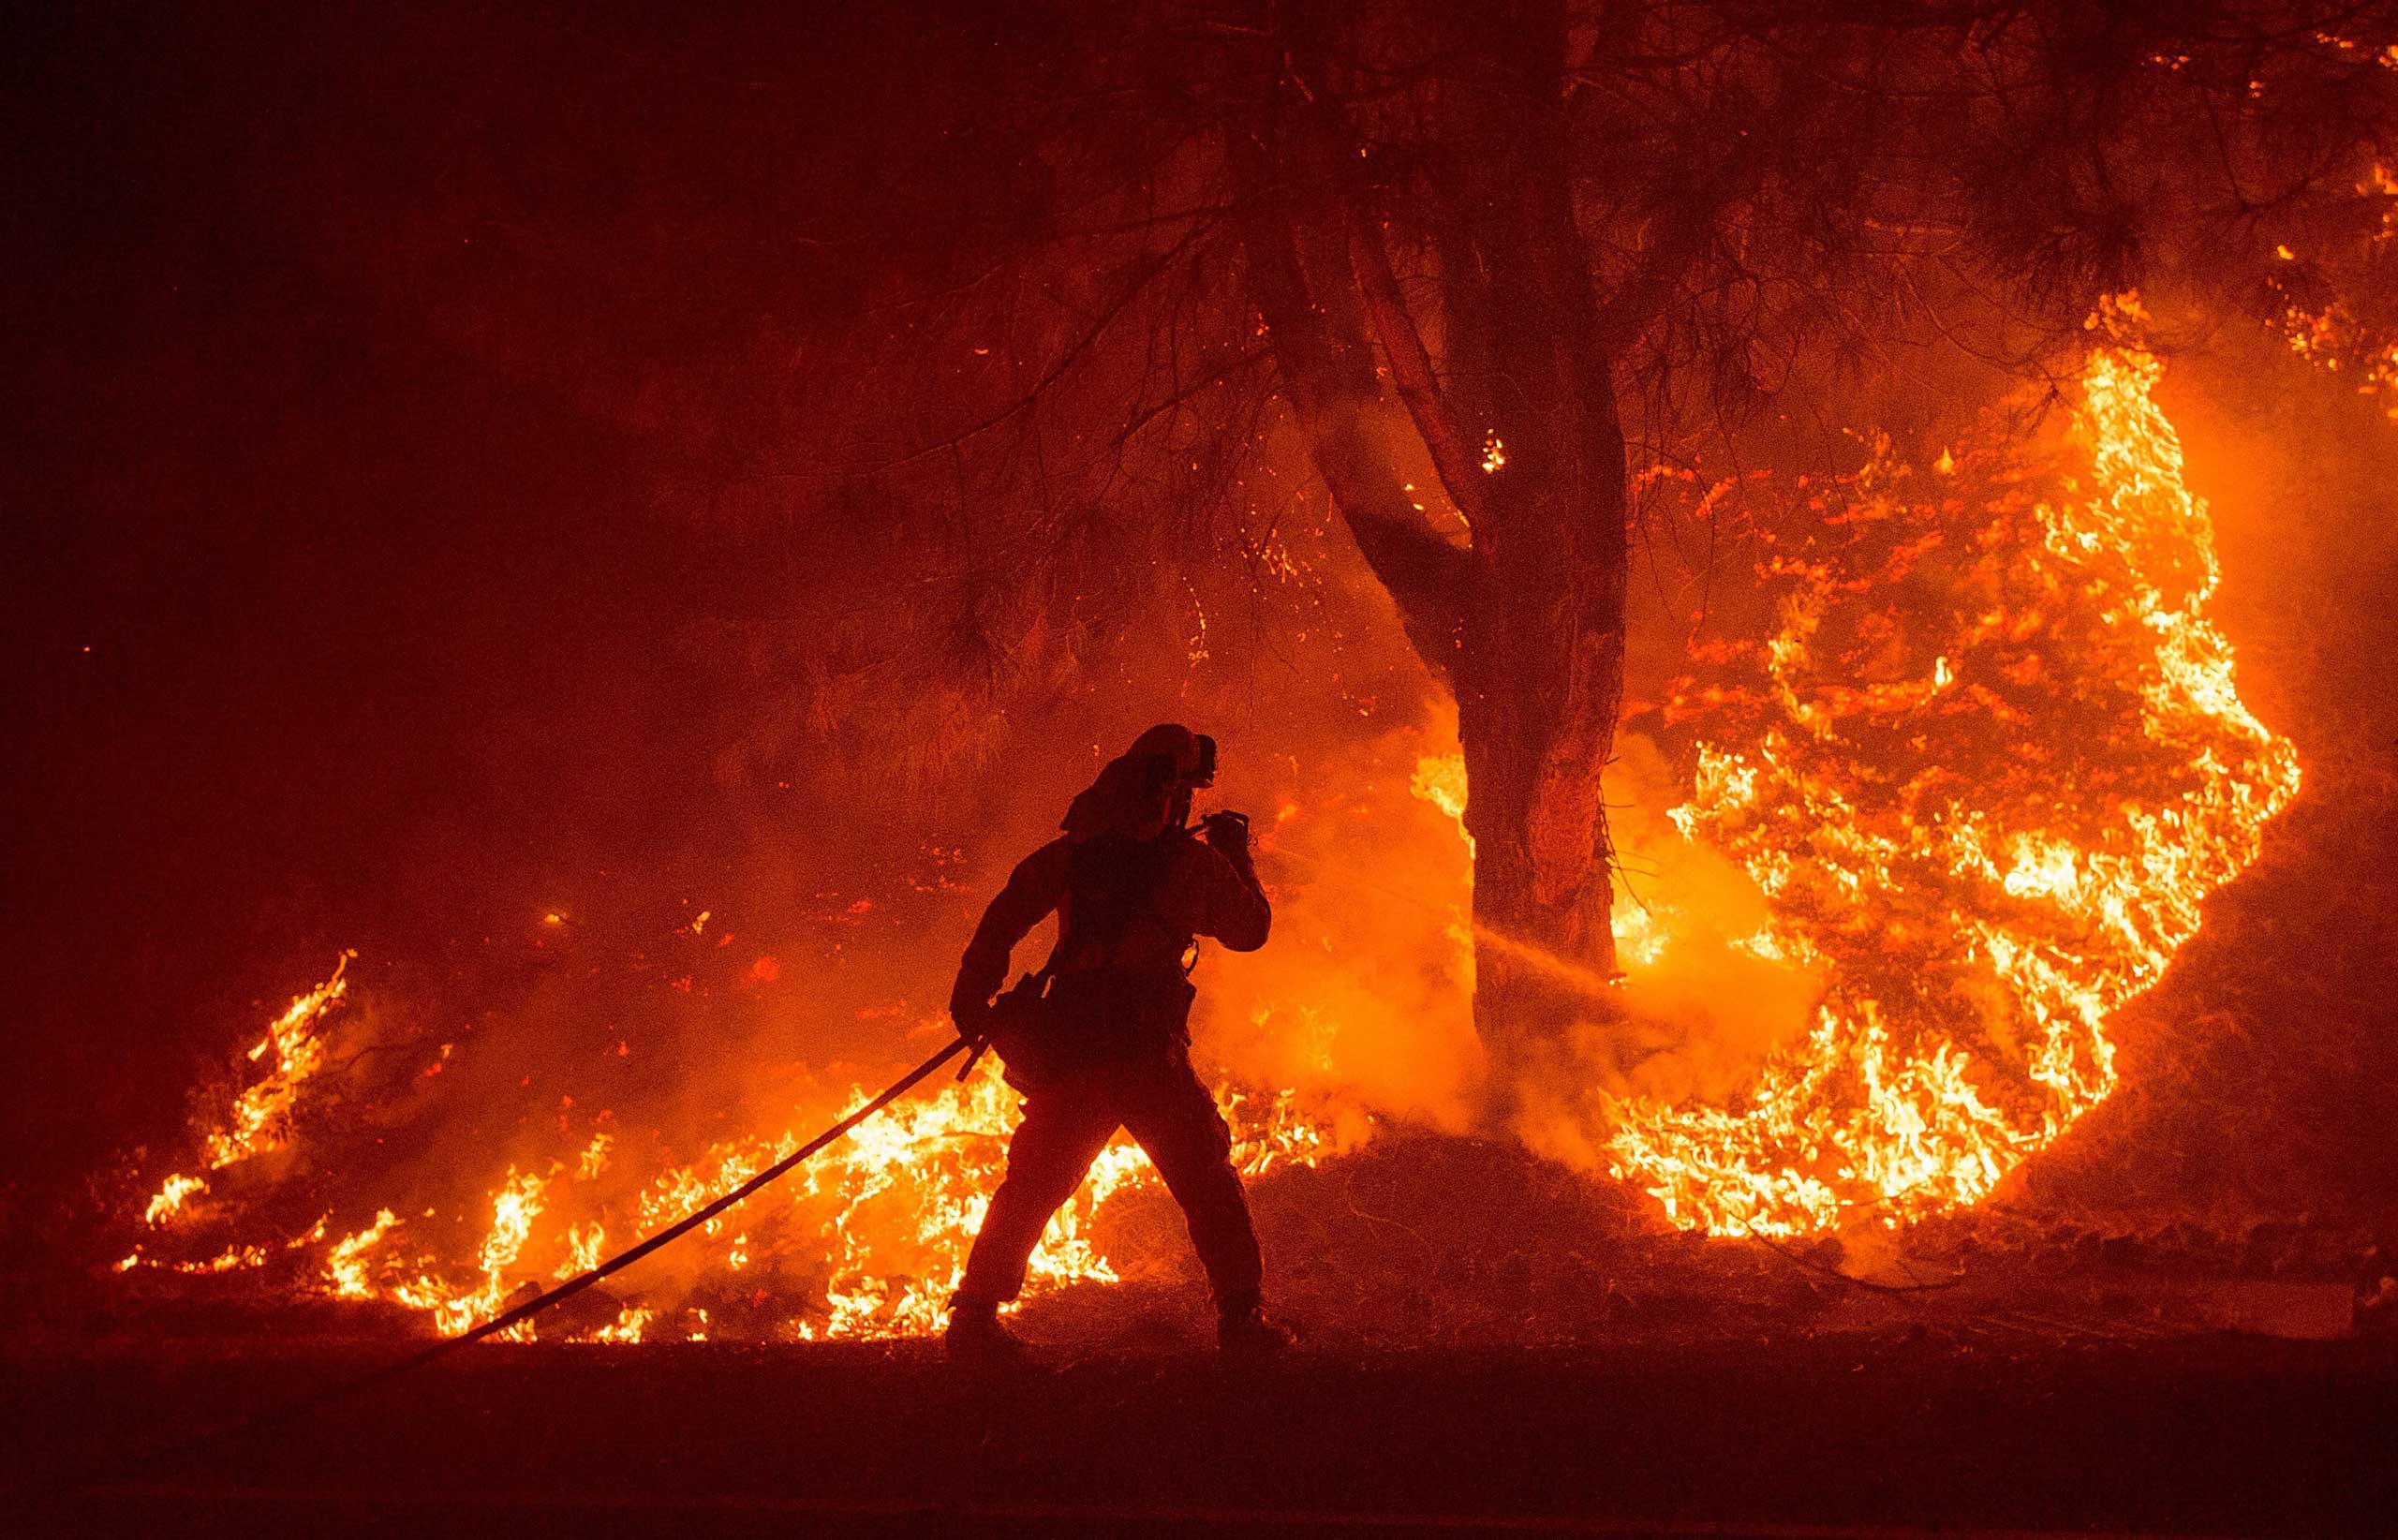 A firefighter sprays water while battling the Rocky fire near Clearlake, Calif. on Aug. 2, 2015.